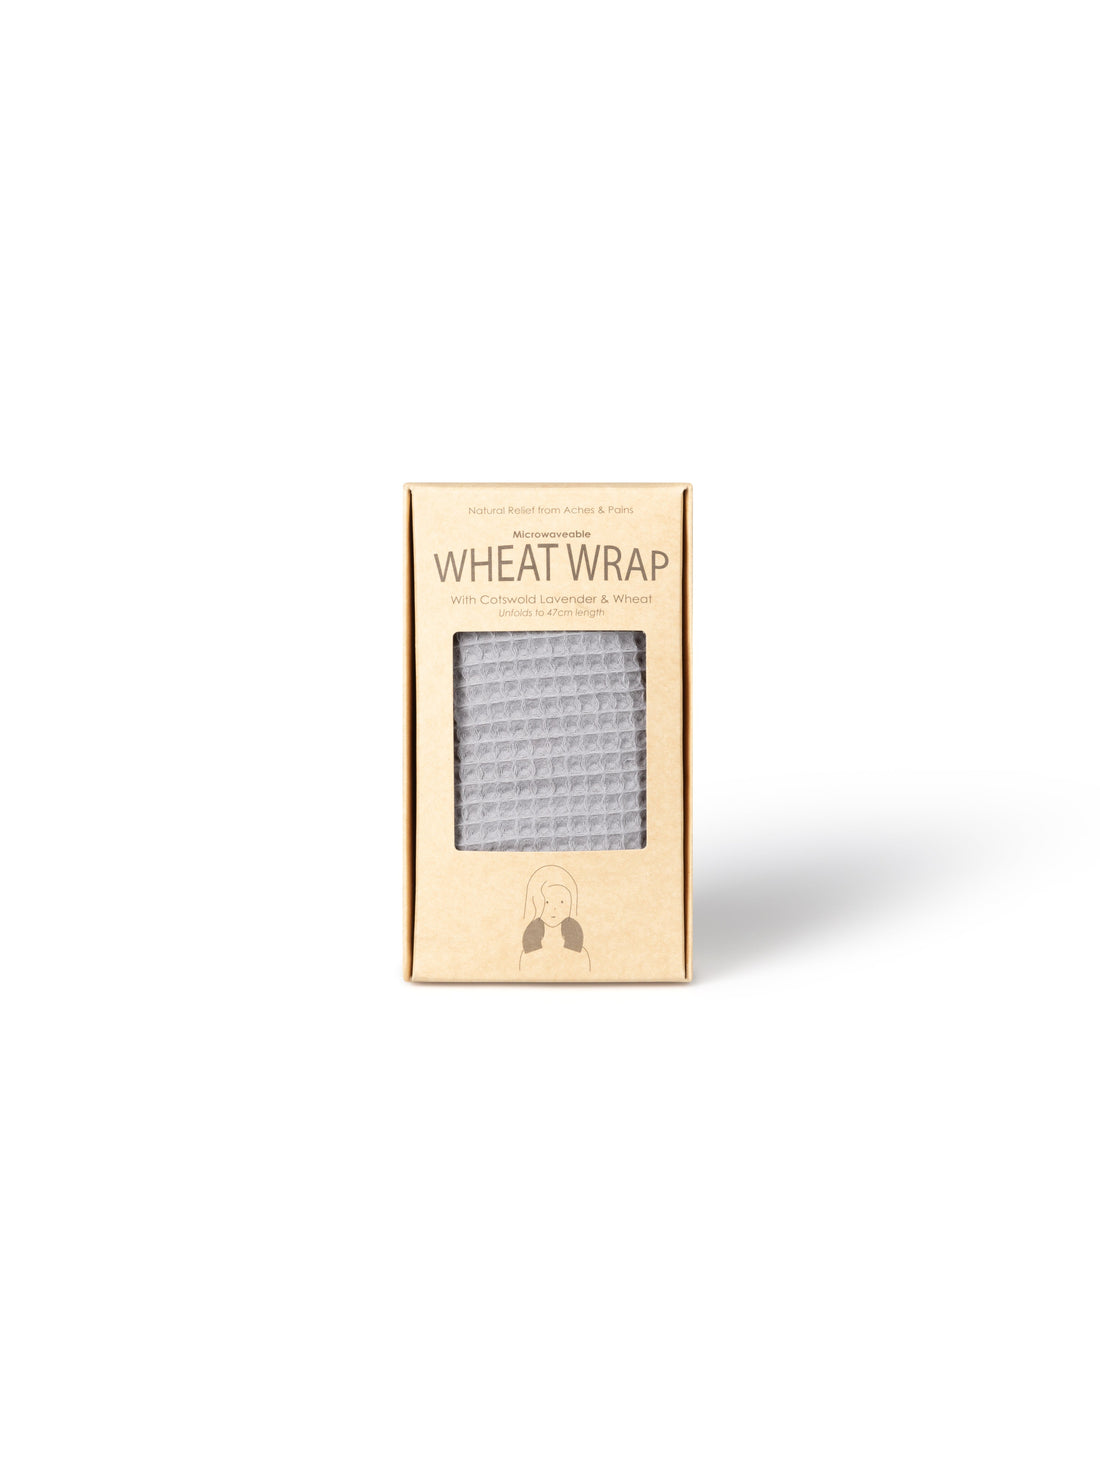 Grey wheat wrap by Chalk, designed for heating or freezing to provide soothing relief for aches and pains.